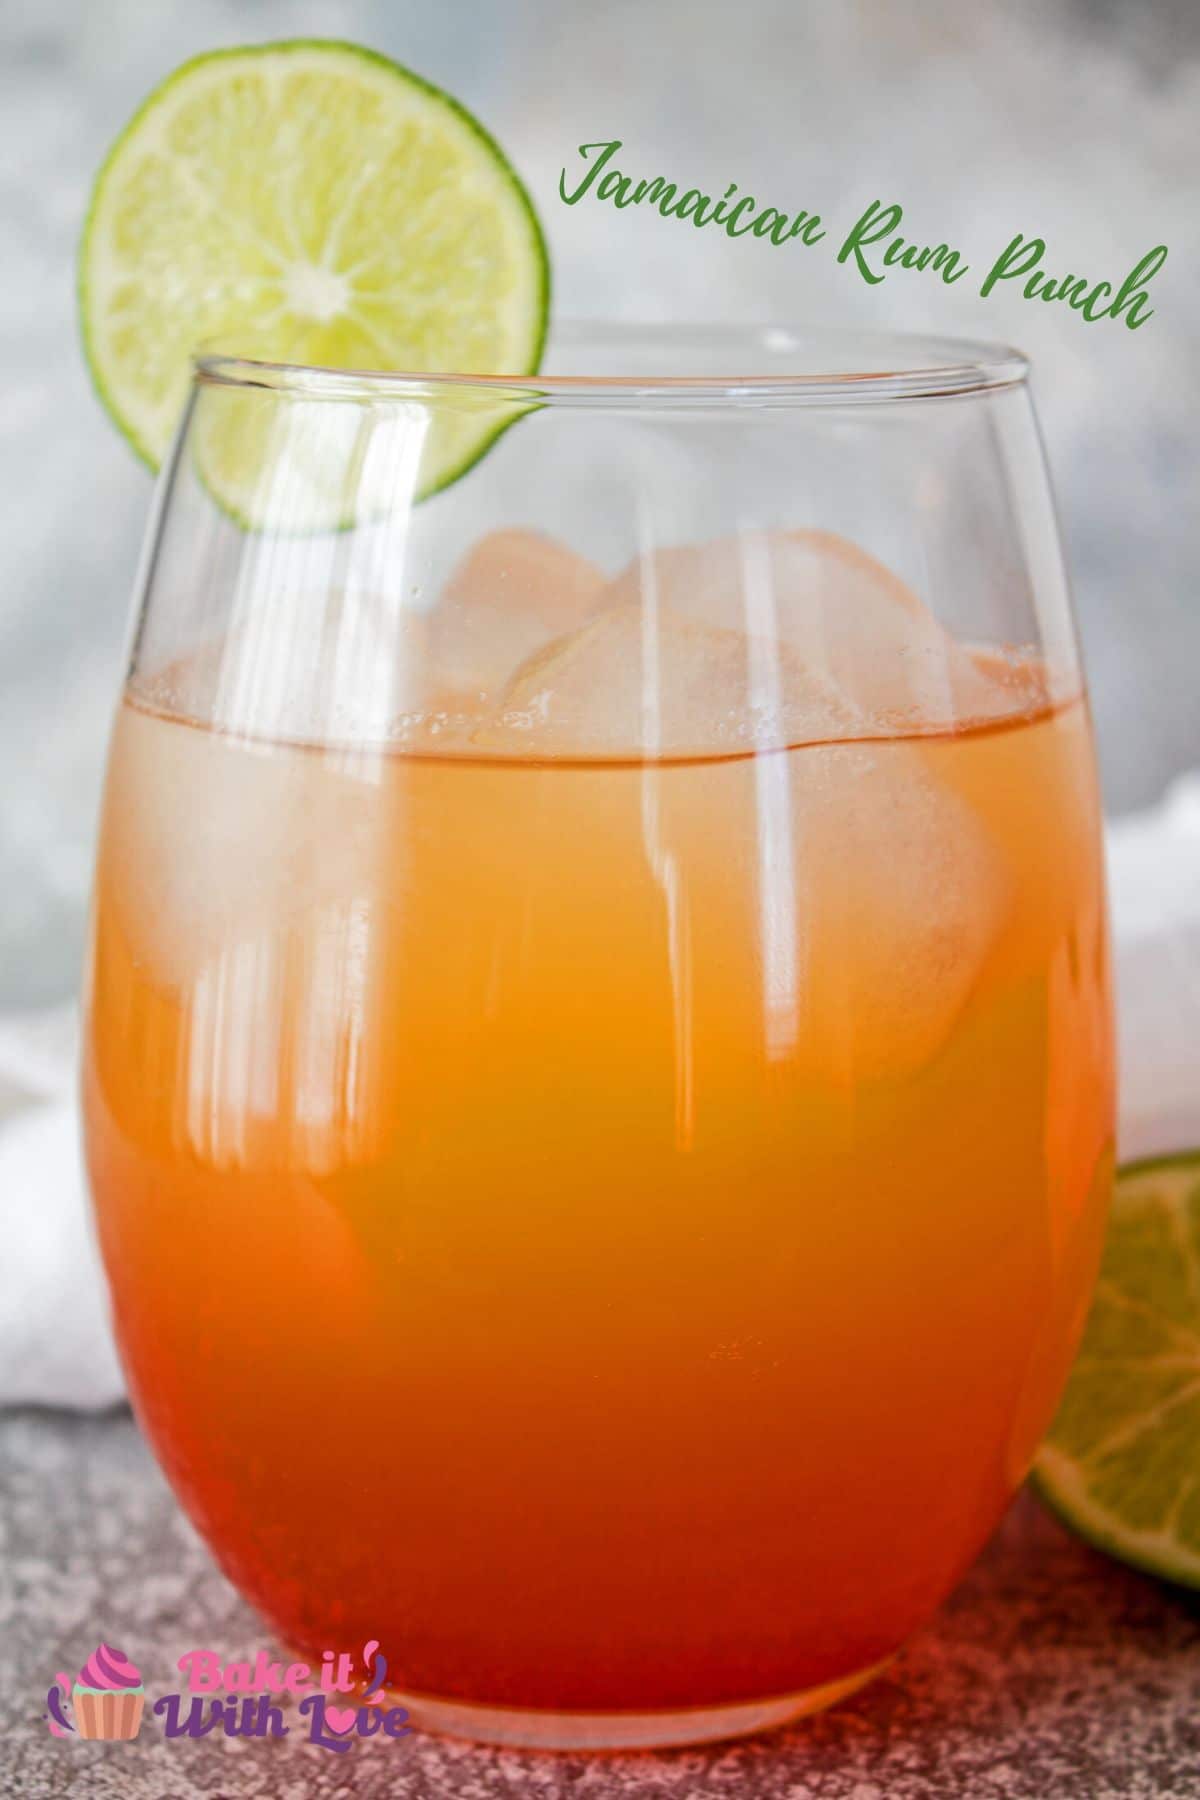 Delightfully refreshing fruit based Jamaican Rum Punch is a tropical favorite for all to enjoy!